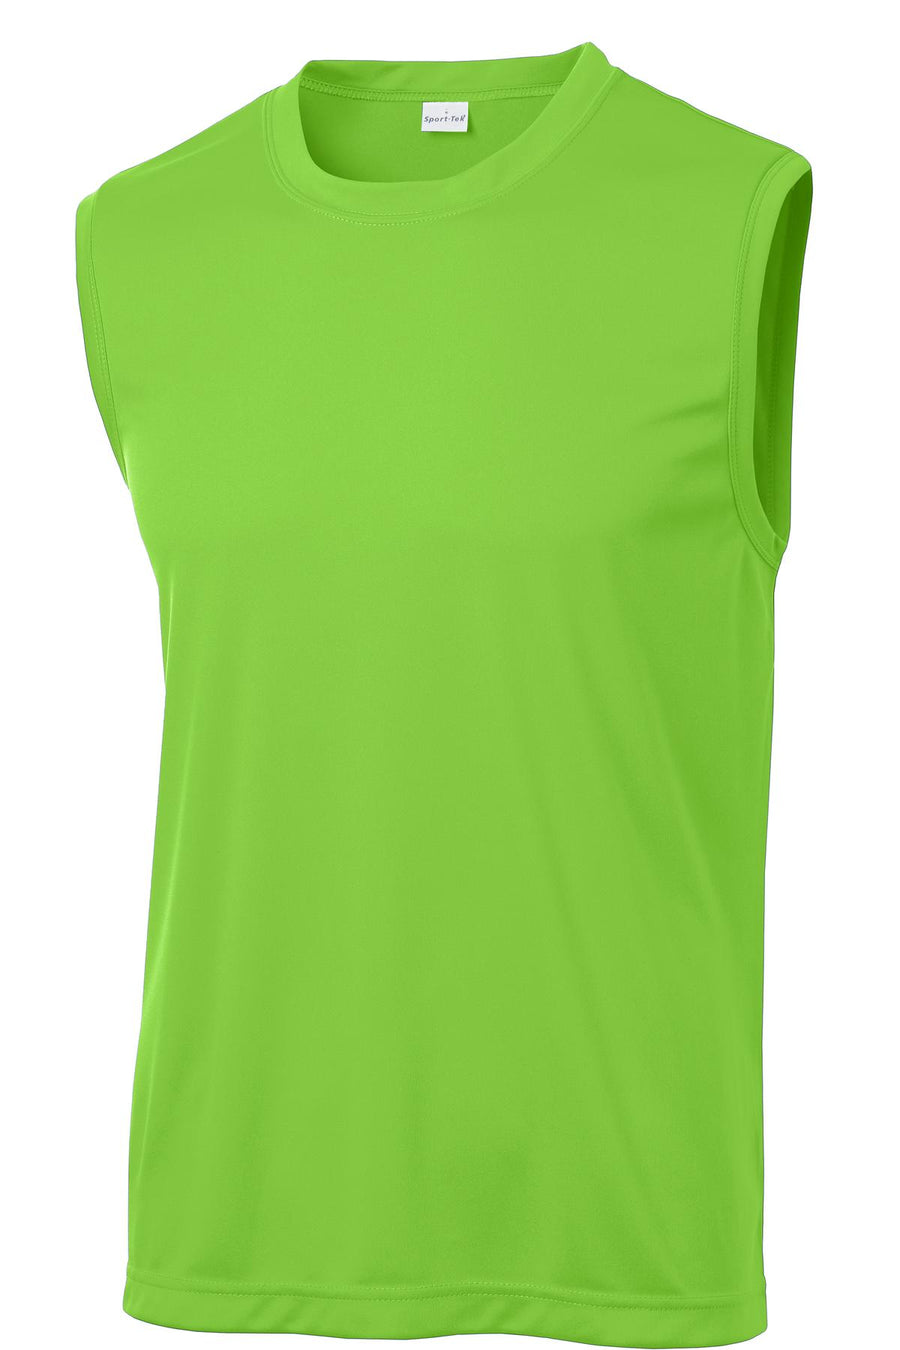 ST352-Lime Shock-front_flat